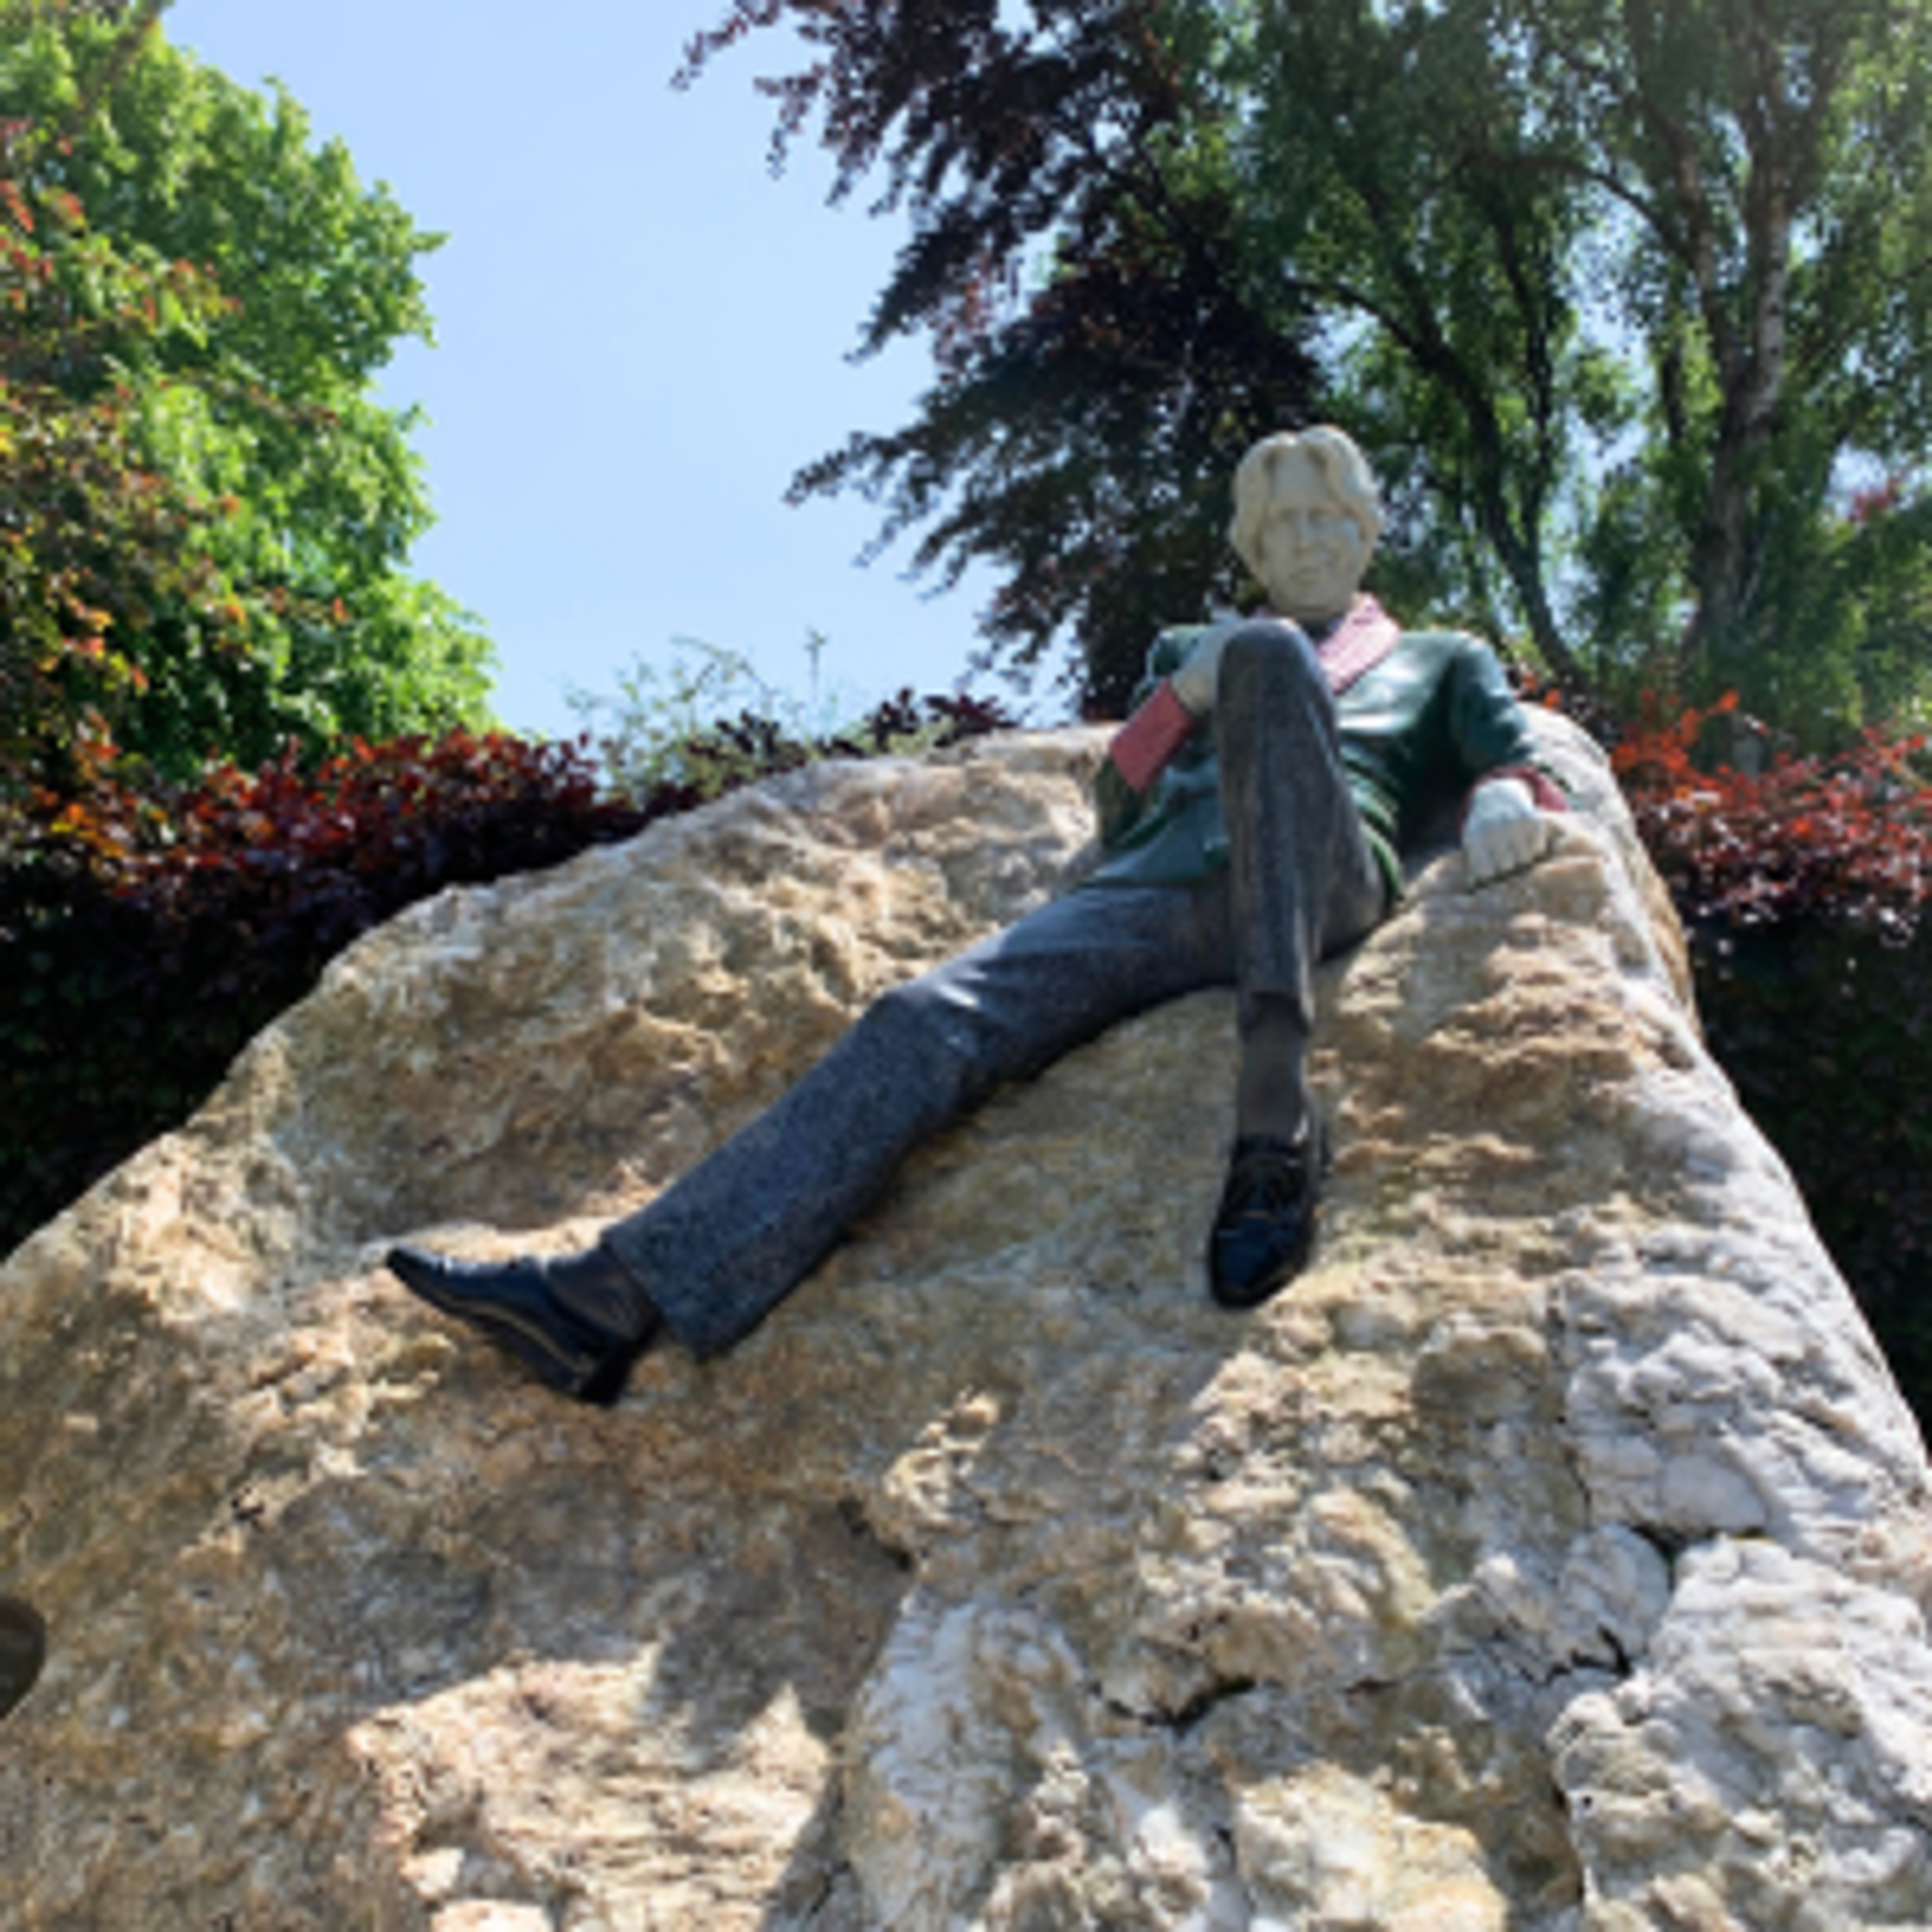 A statue of Oscar Wilde relaxing on a stone in picturesque Merrion Square Park